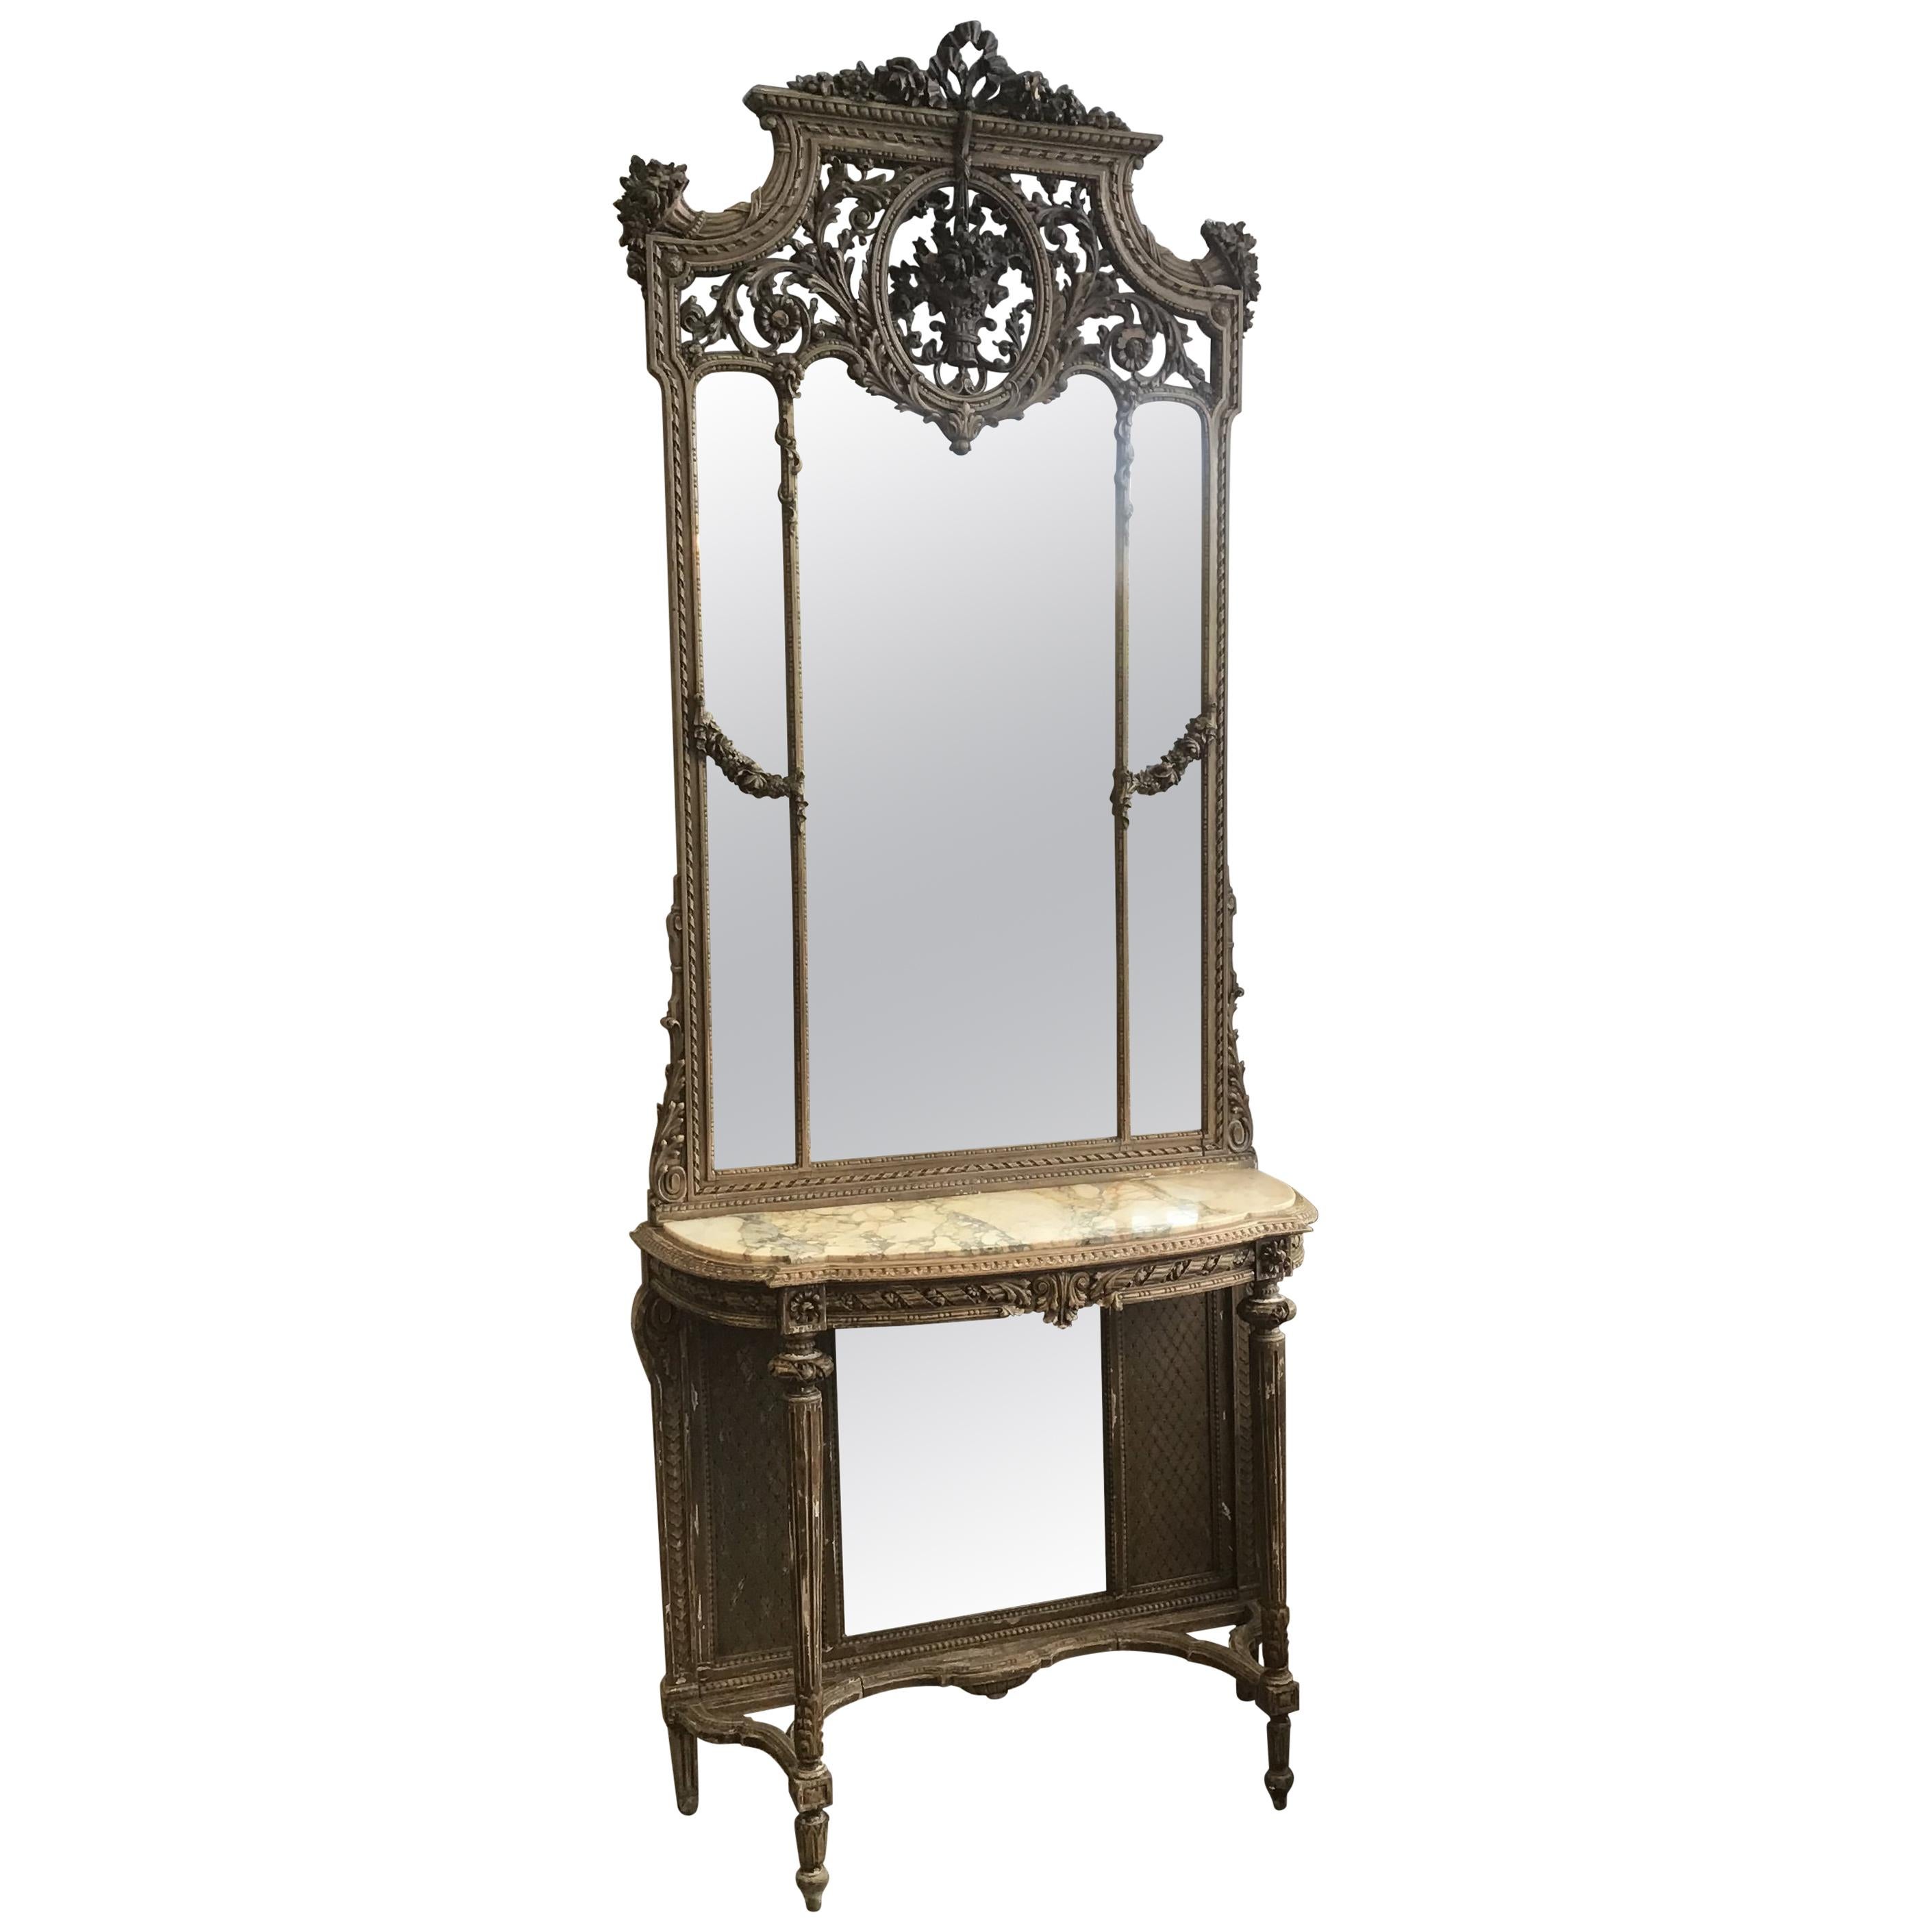 19th Century French Marble-Top Console with Giltwood Framed Mirror from 1890s